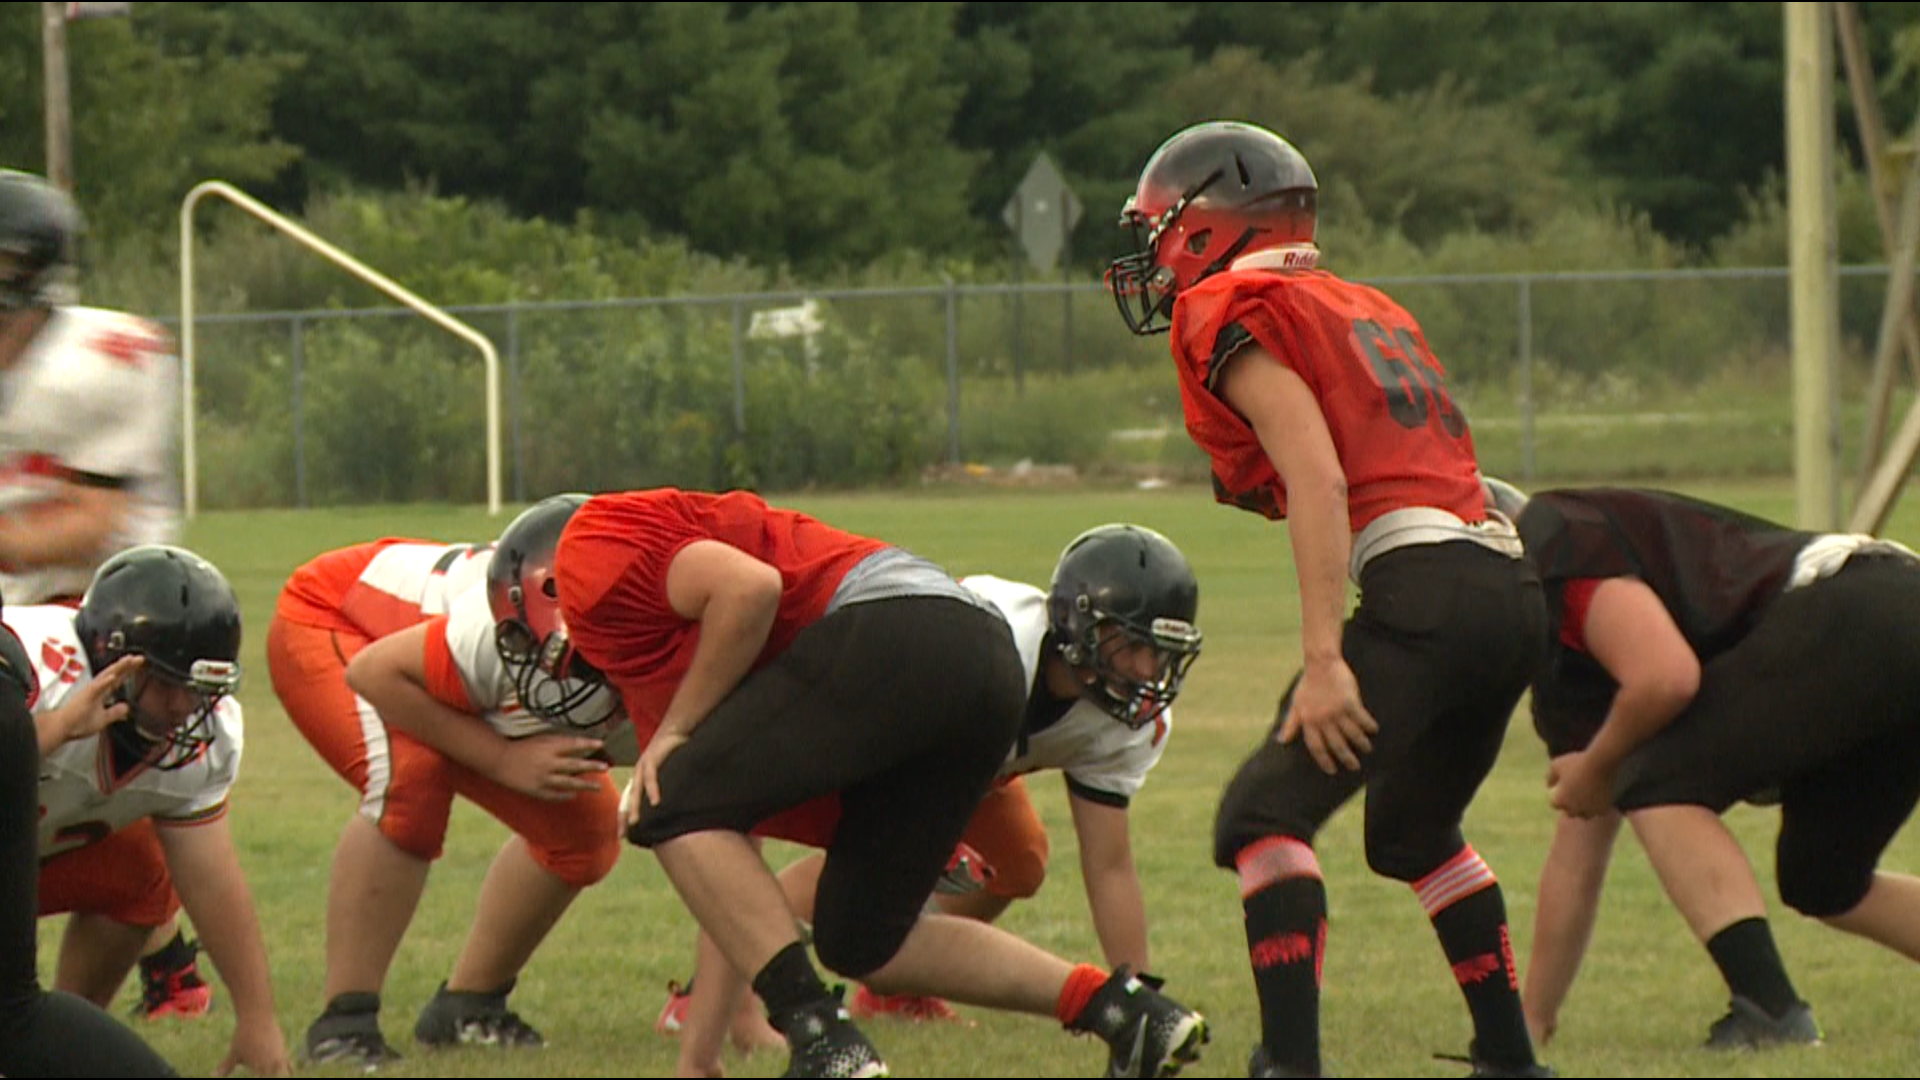 A Newaygo County high school has canceled its 2019 varsity football season just a week and a half before it was scheduled to start. However, they say they do have enough players to field a junior varsity team, and that 7th and 8th grade numbers are solid along with the area's Rocket Football league.